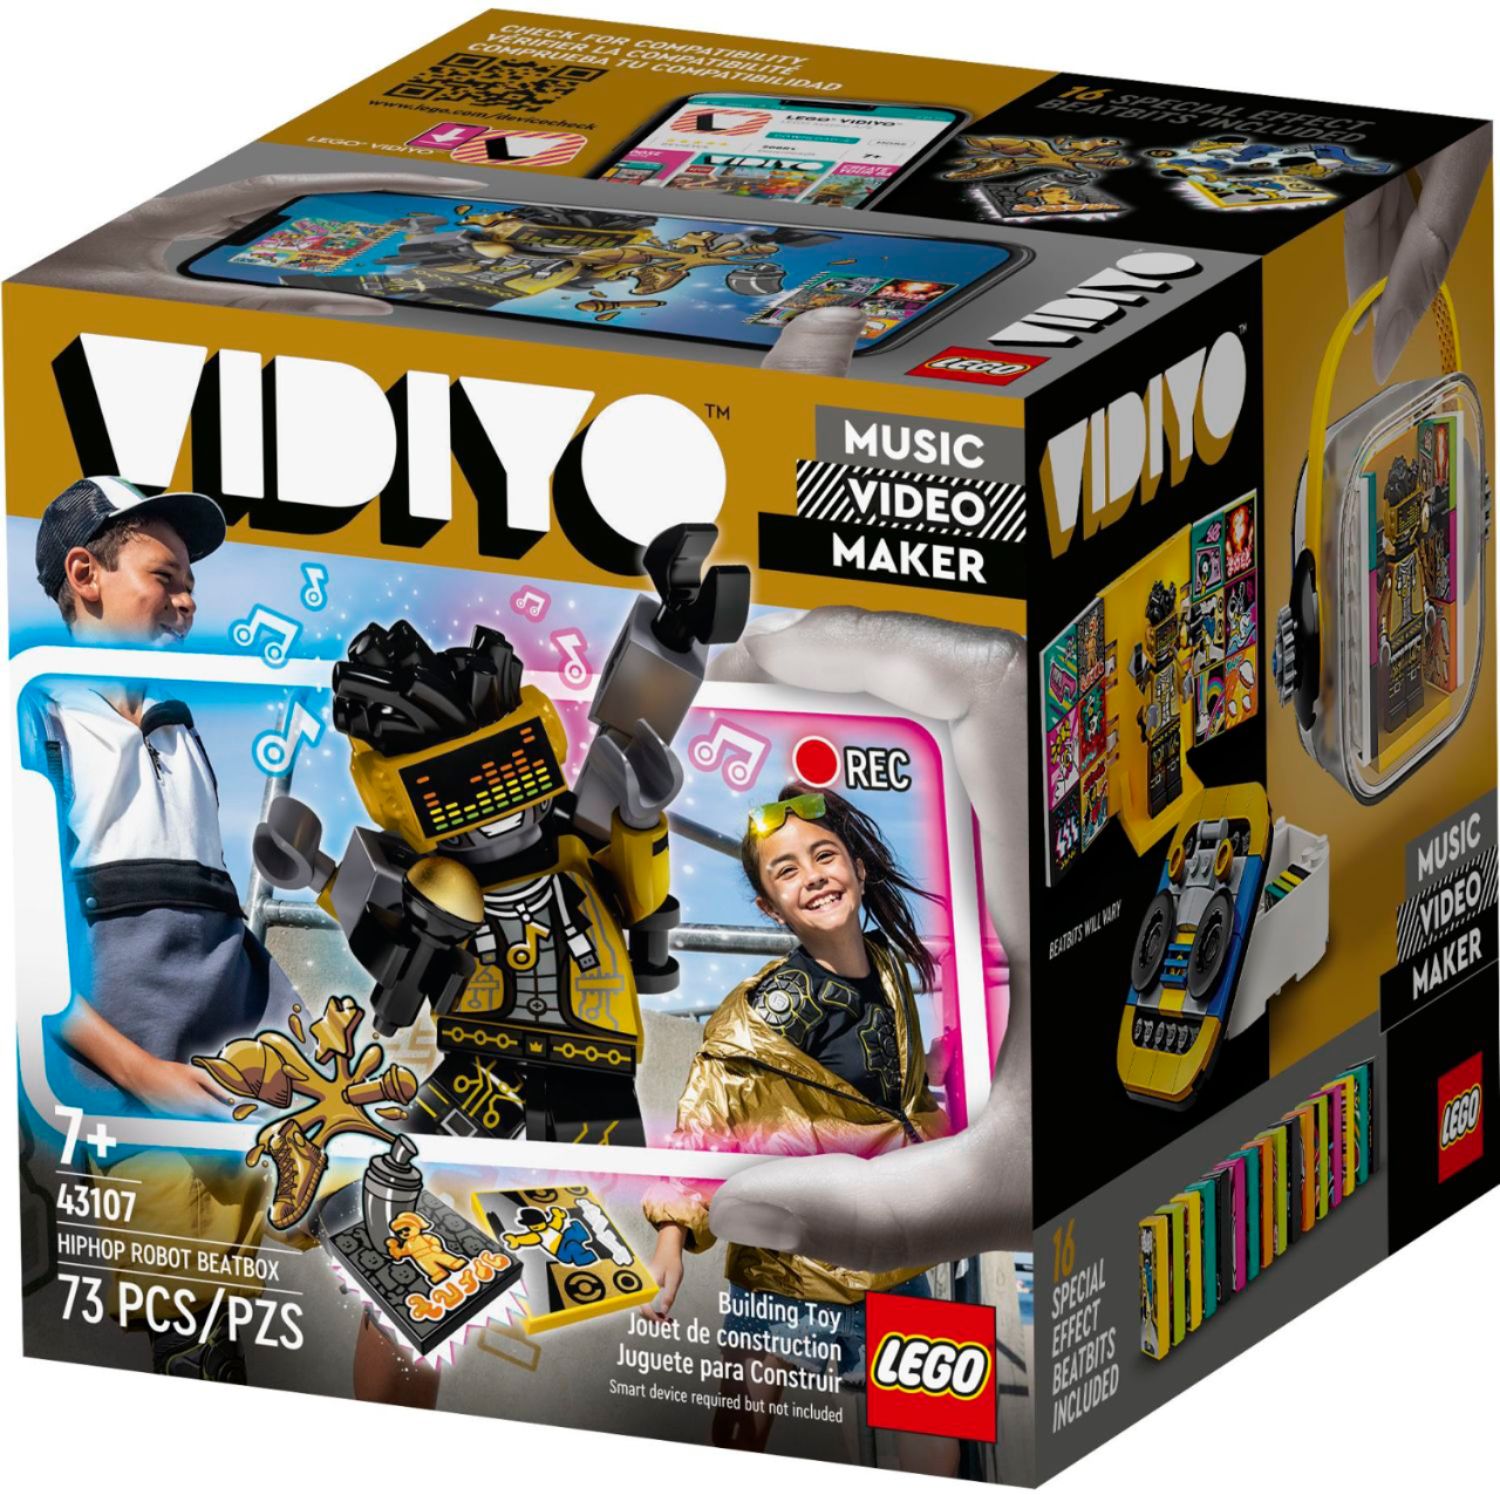 LEGO 43107 VIDIYO HipHop Robot BeatBox Music Video Maker Musical Toy for Kids Augmented Reality Set with App